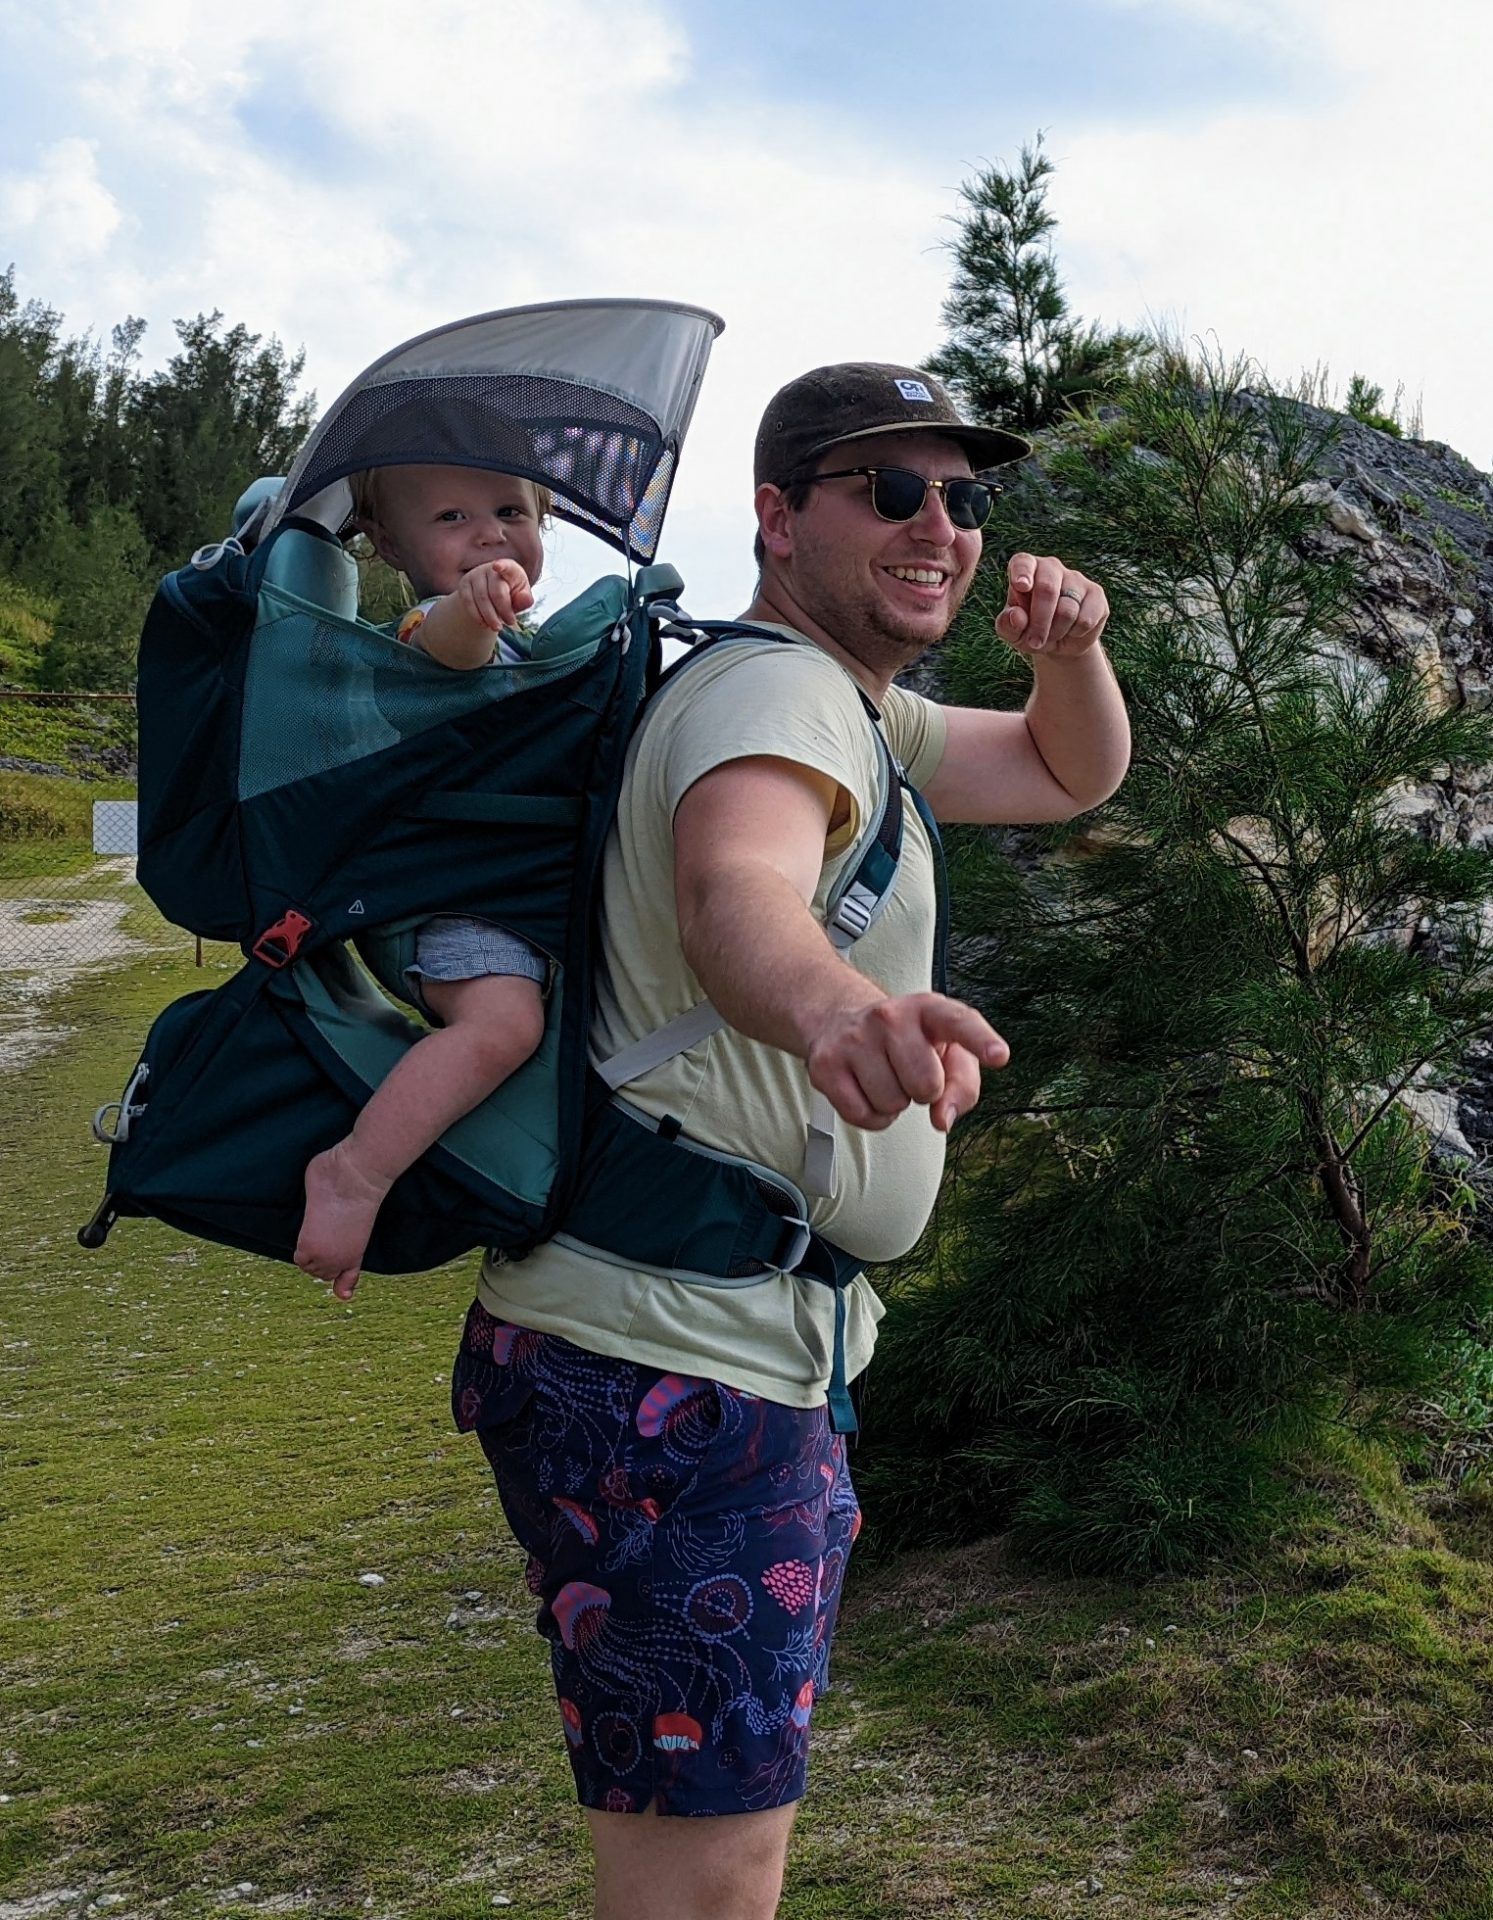 Hiking with a baby backpack in Bermuda